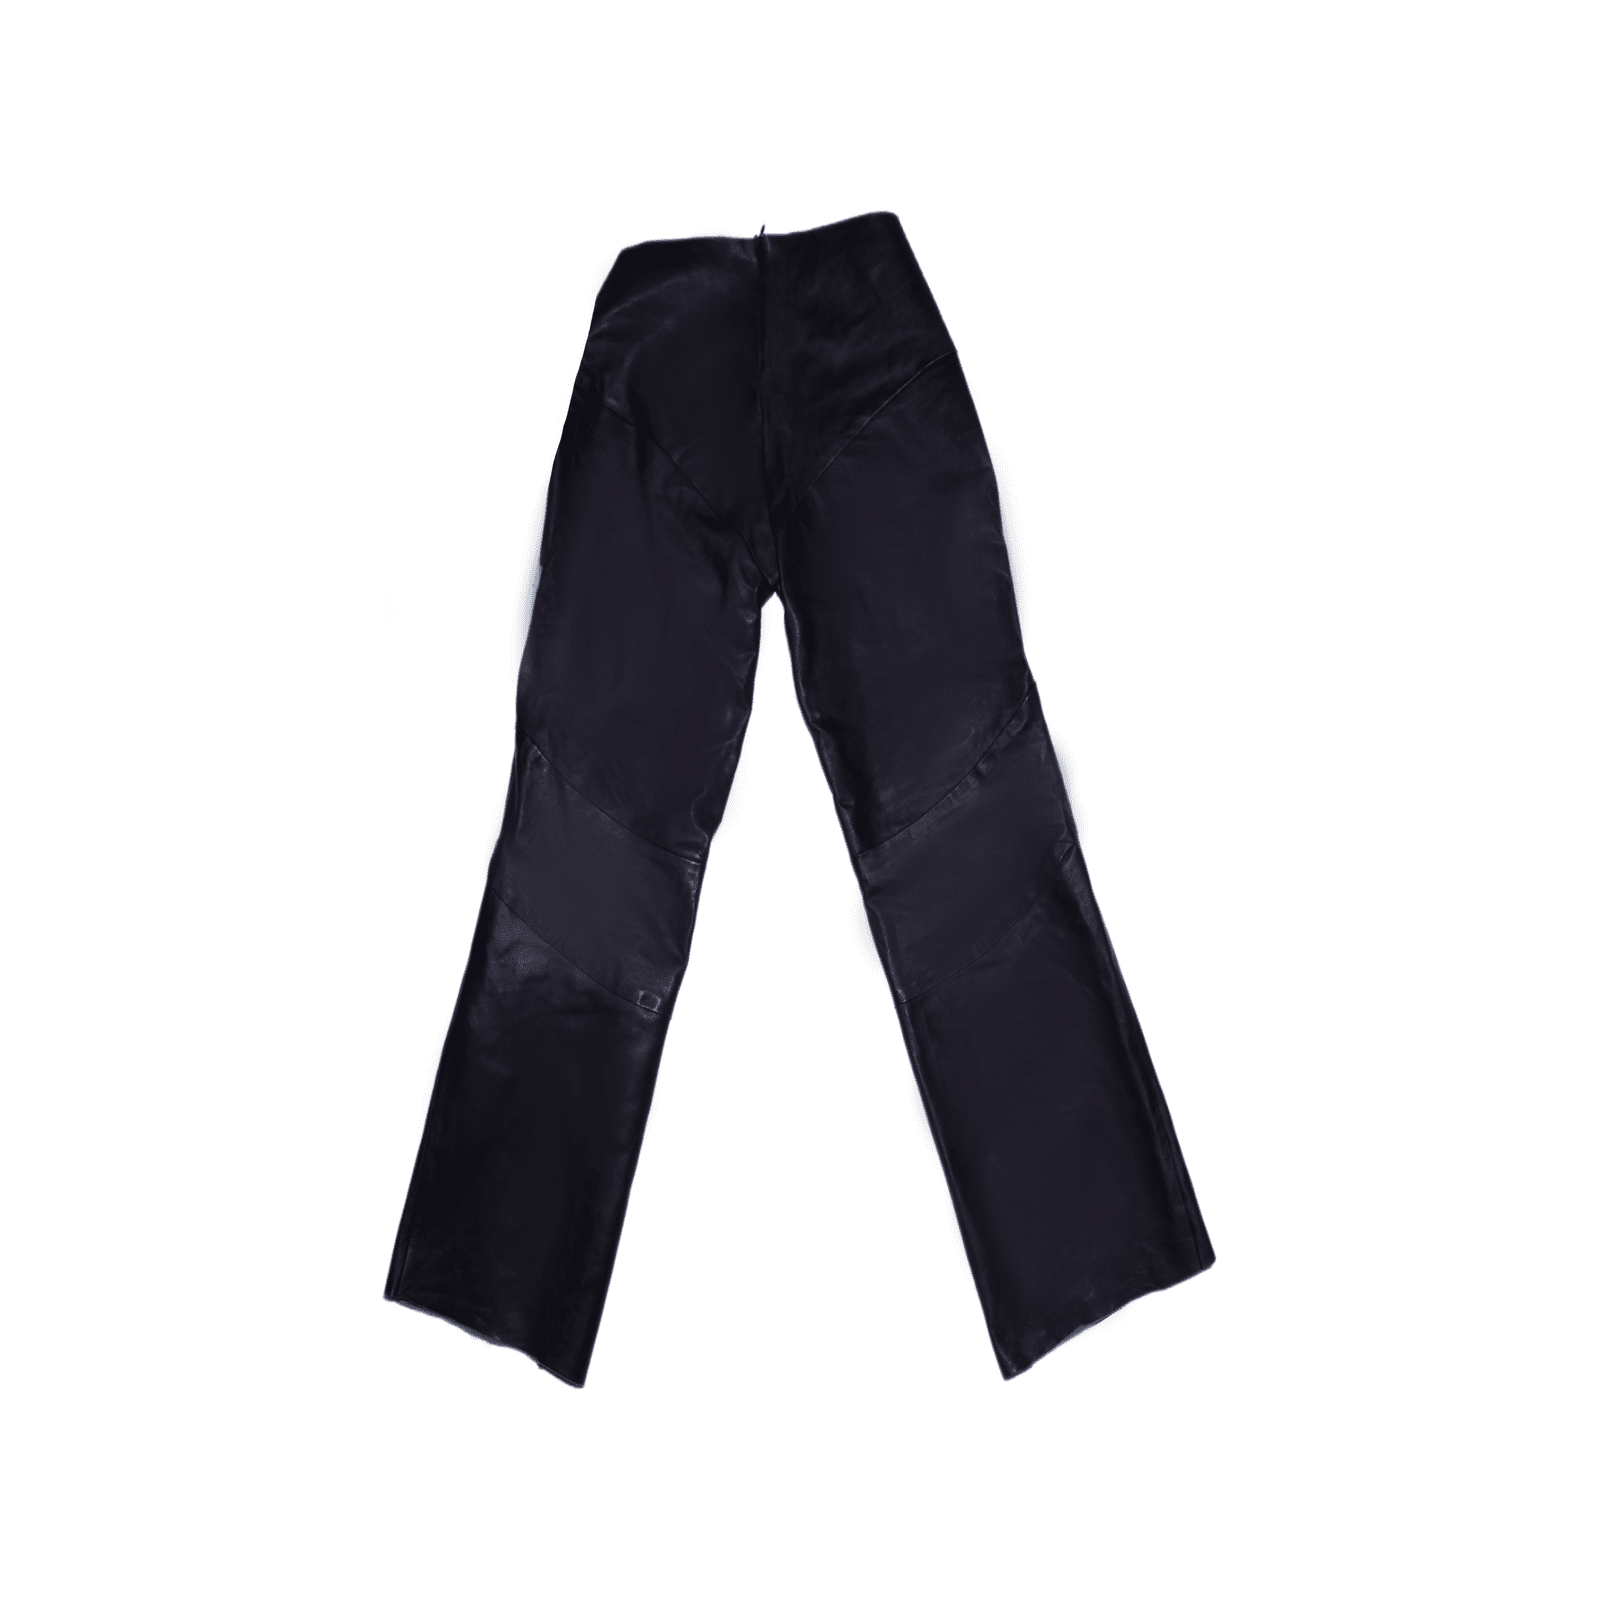 MAIN C-HAIR-ACTER LEATHER PANTS